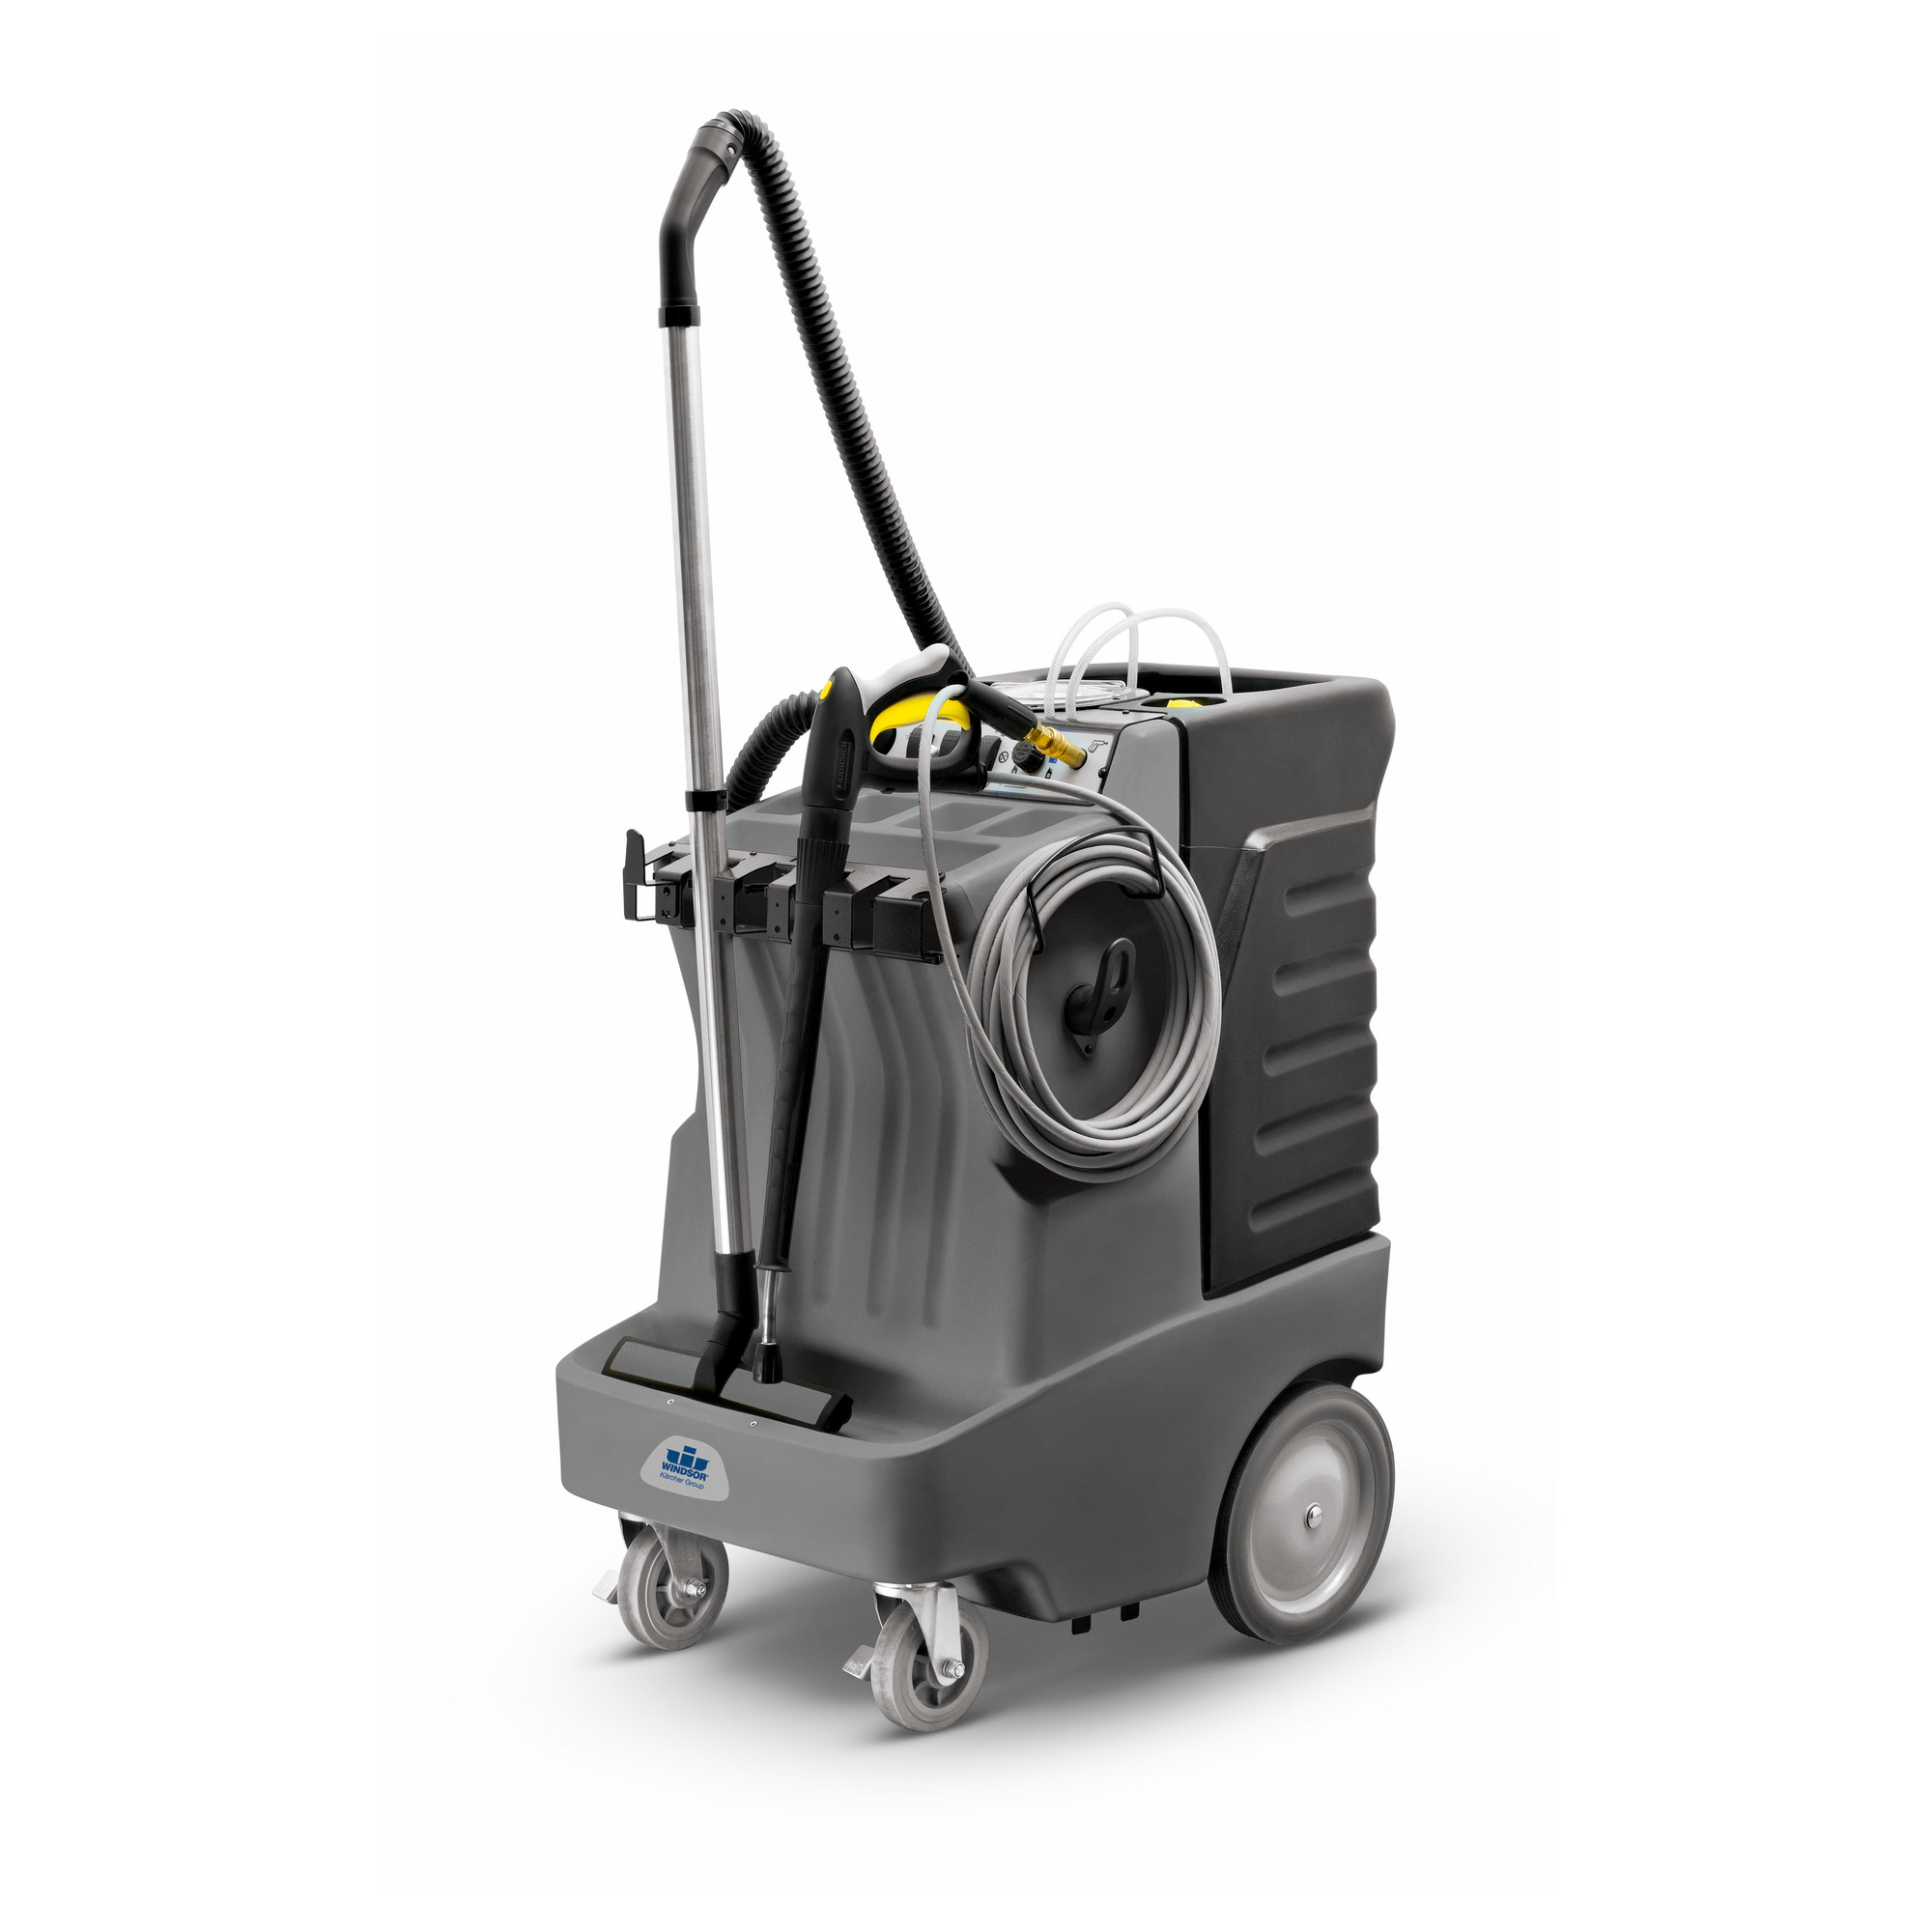 COMPASS 2 MULTI-SURFACE CLEANING MACHINE- PRESSURE